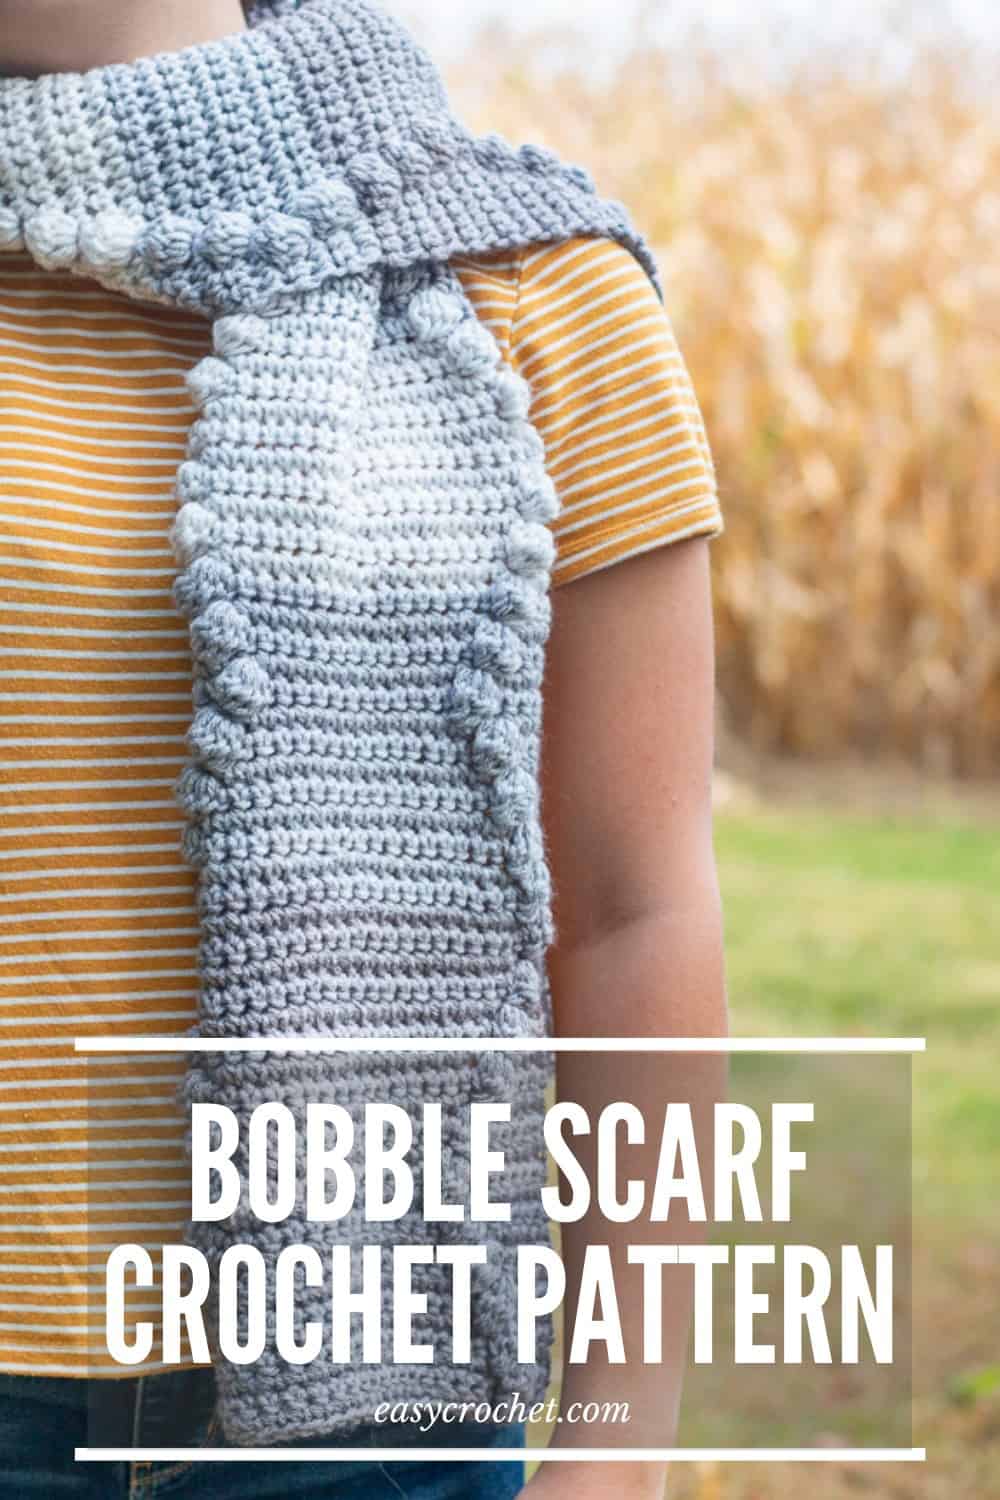 Bobble Scarf Crochet Pattern - Learn how to make this simple crochet scarf with the free pattern from easycrochet.com via @easycrochetcom